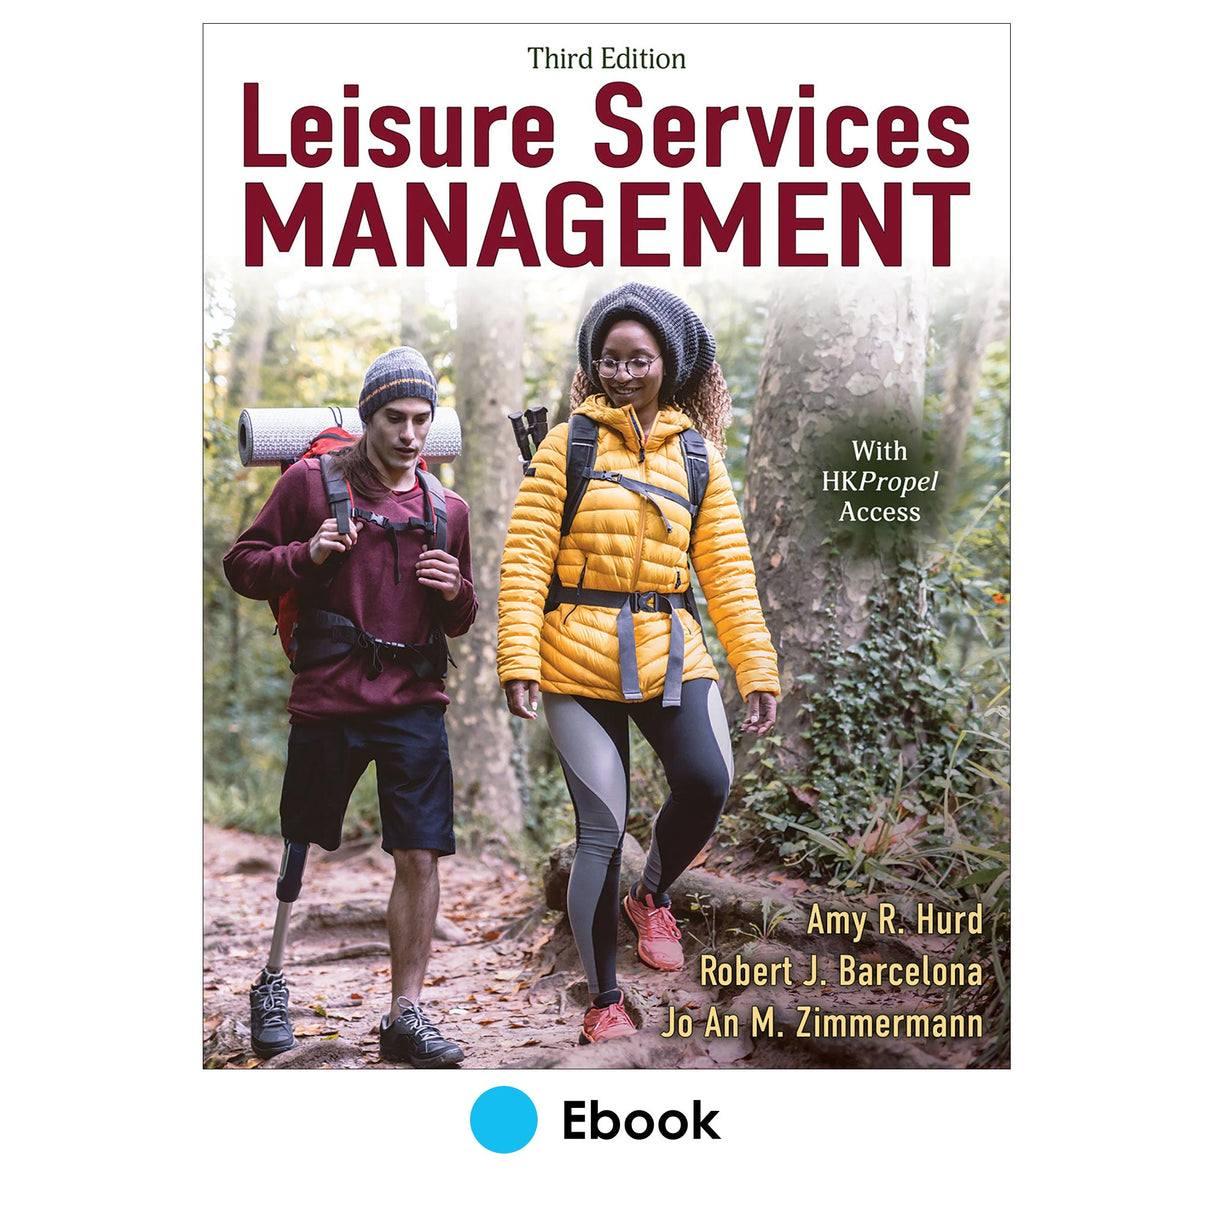 Leisure Services Management 3rd Edition Ebook With HKPropel Access